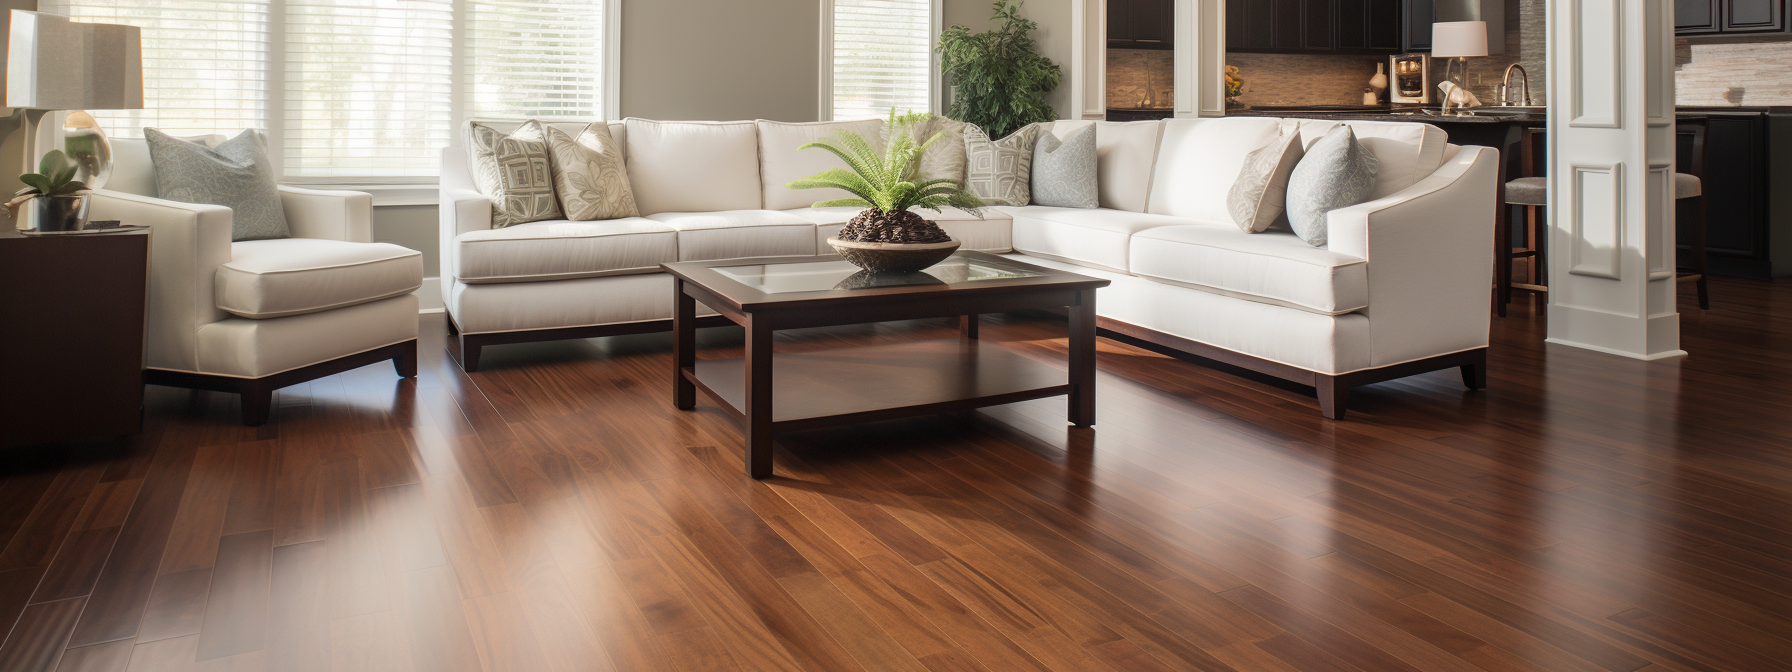 Top Maintenance Tips for Keeping Your Hardwood Floors Shiny and New